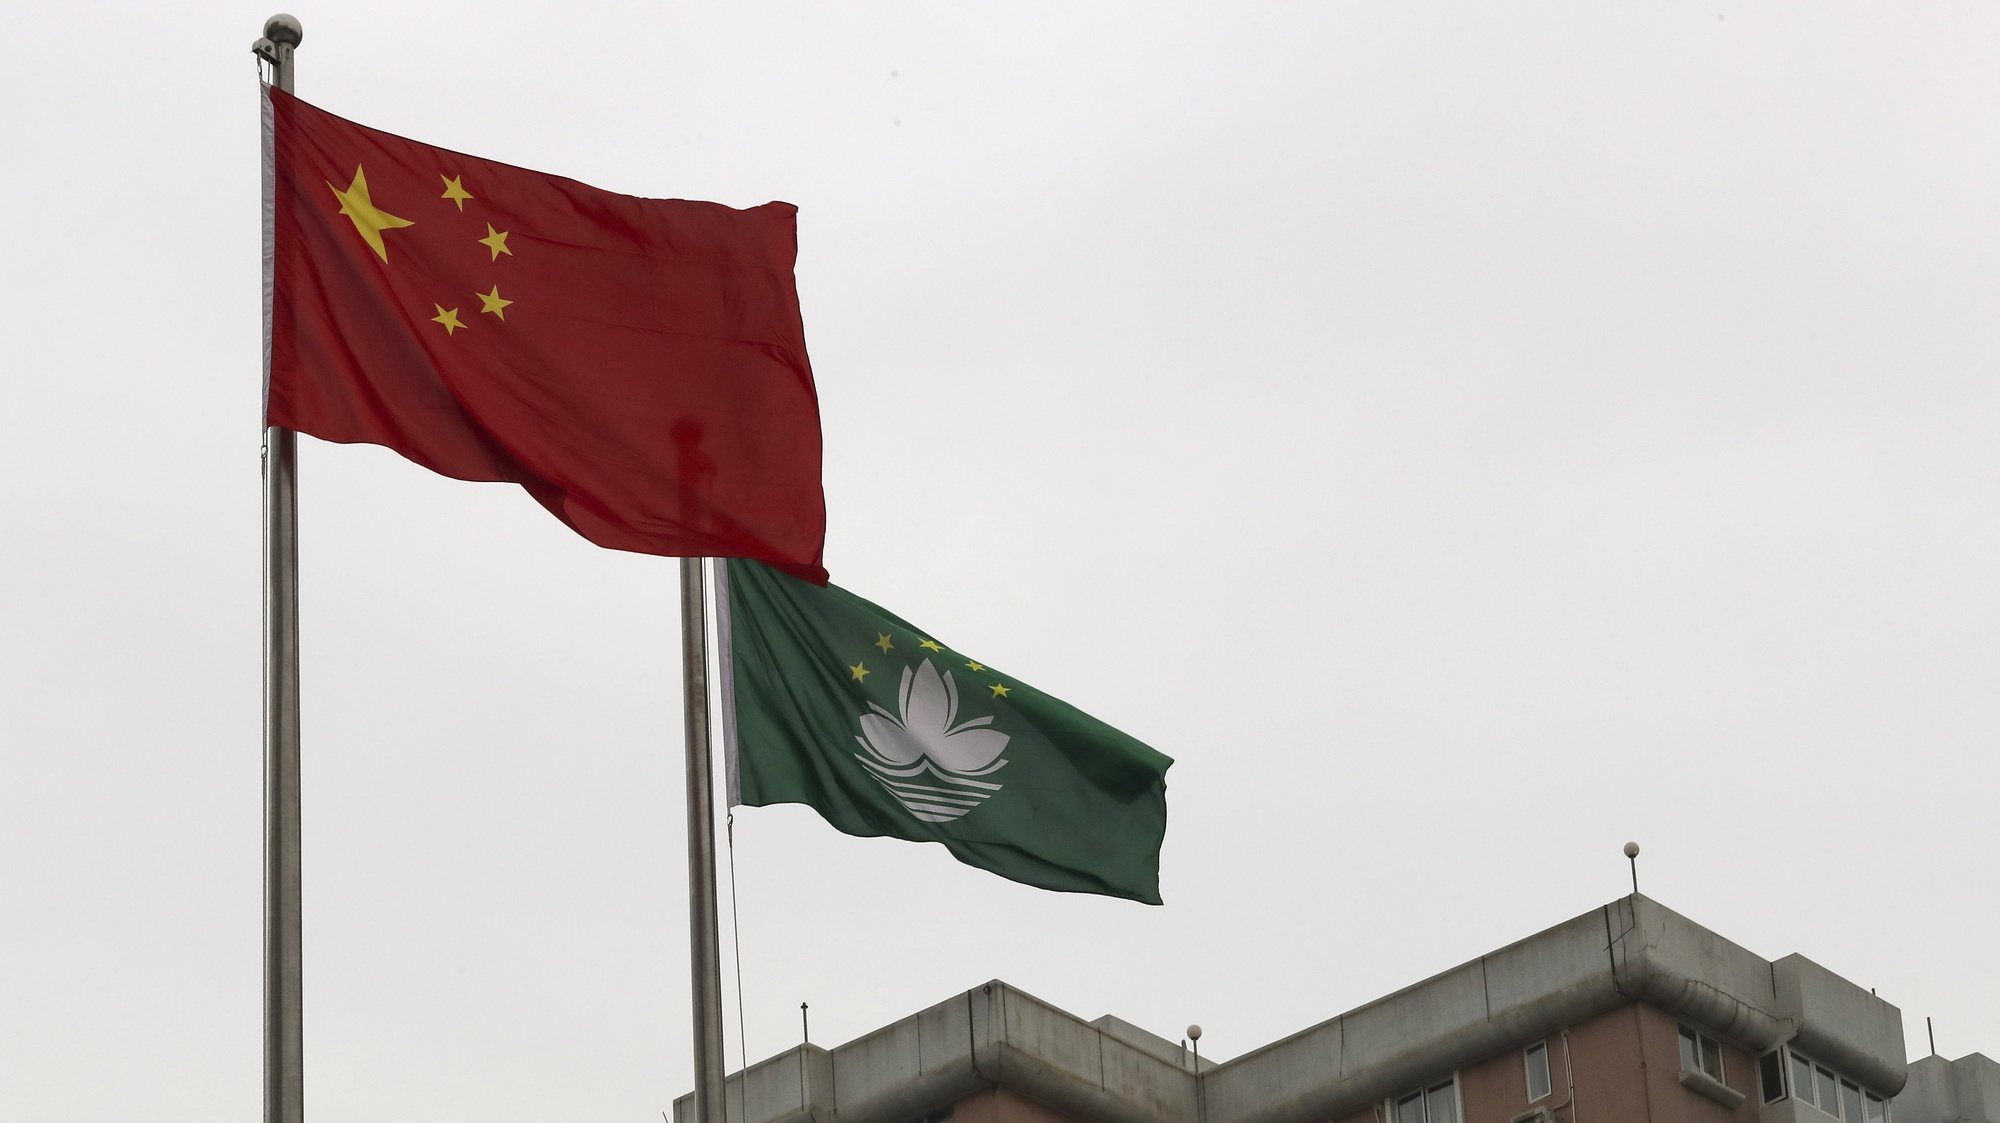 epa08082673 Chinese and Macao&#039;s flags wave during the flag-raising ceremony for Macao Special Administrative Region&#039;s (SAR) 20th anniversary at Lotus Flower Square in Macao, China, 20 December 2019. Macao had been a Portuguese colony until 1999 when it returned to Chinese rule under the &#039;one country, two systems&#039; principle.  EPA/JOAO RELVAS